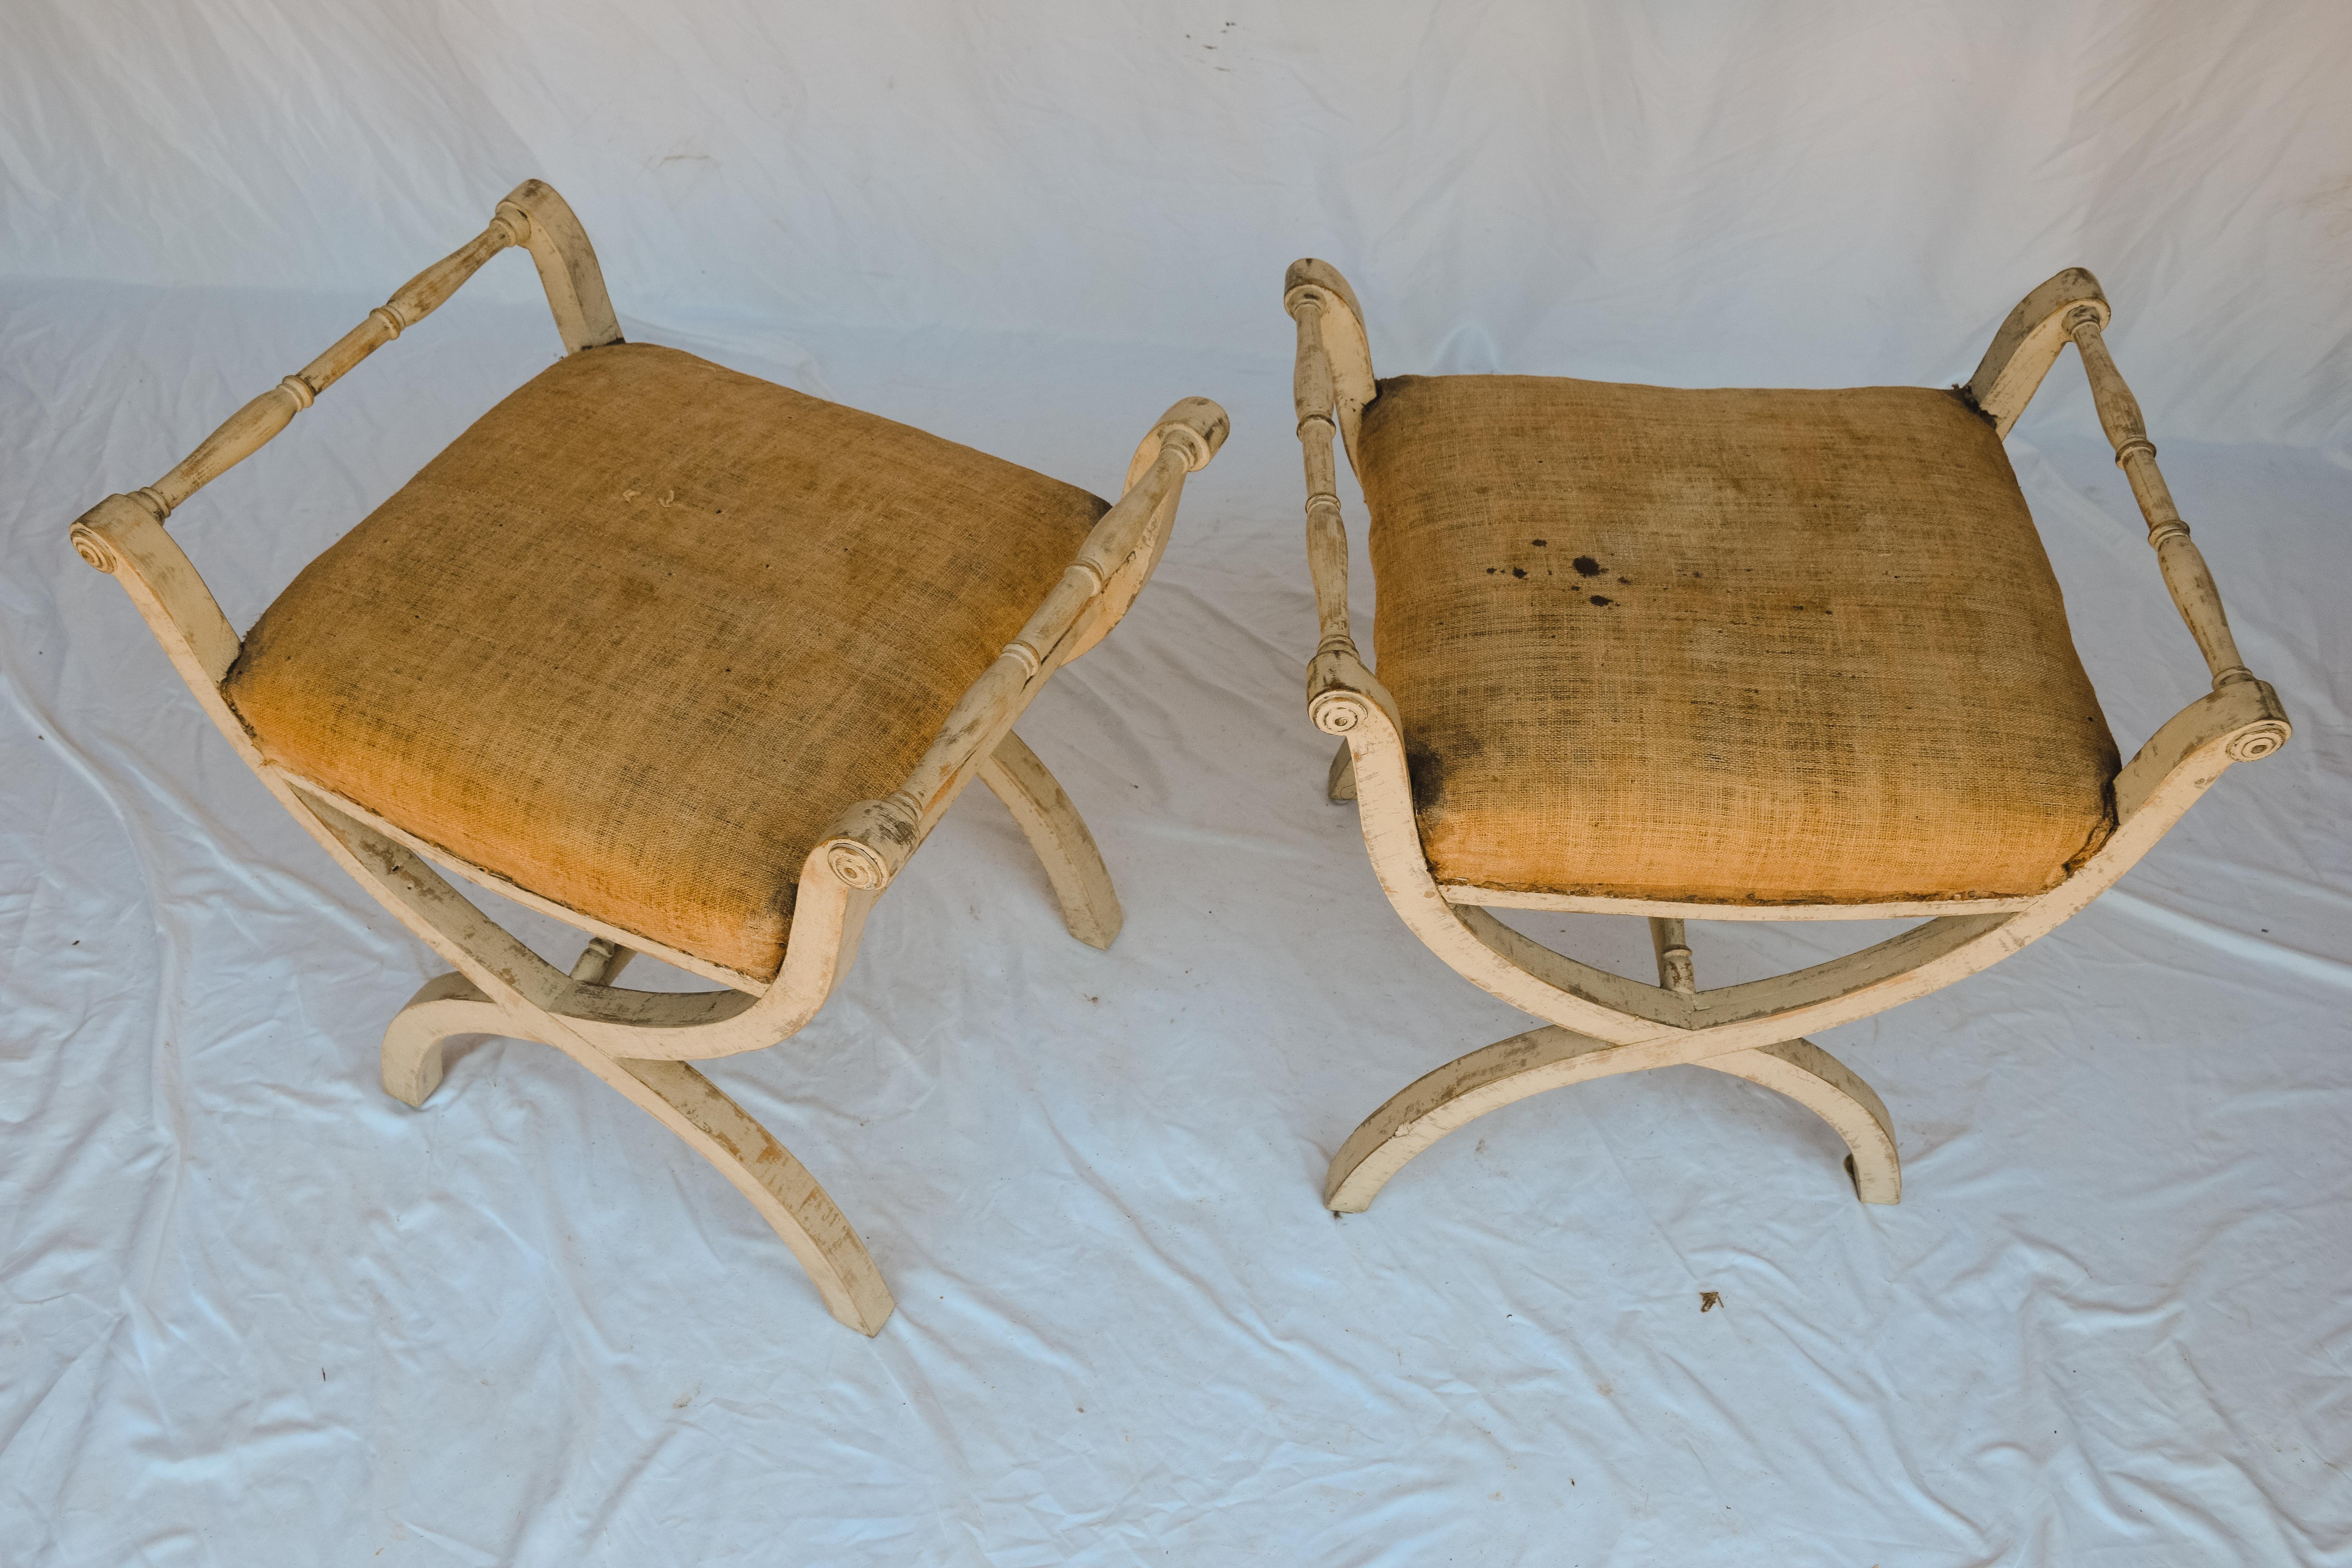 This pair of Antique Swedish Gustavian Stools has two low arms and an x-shaped frame. They have a beautiful aged ivory painted patina and reinforced seats upholstered in their original linen.